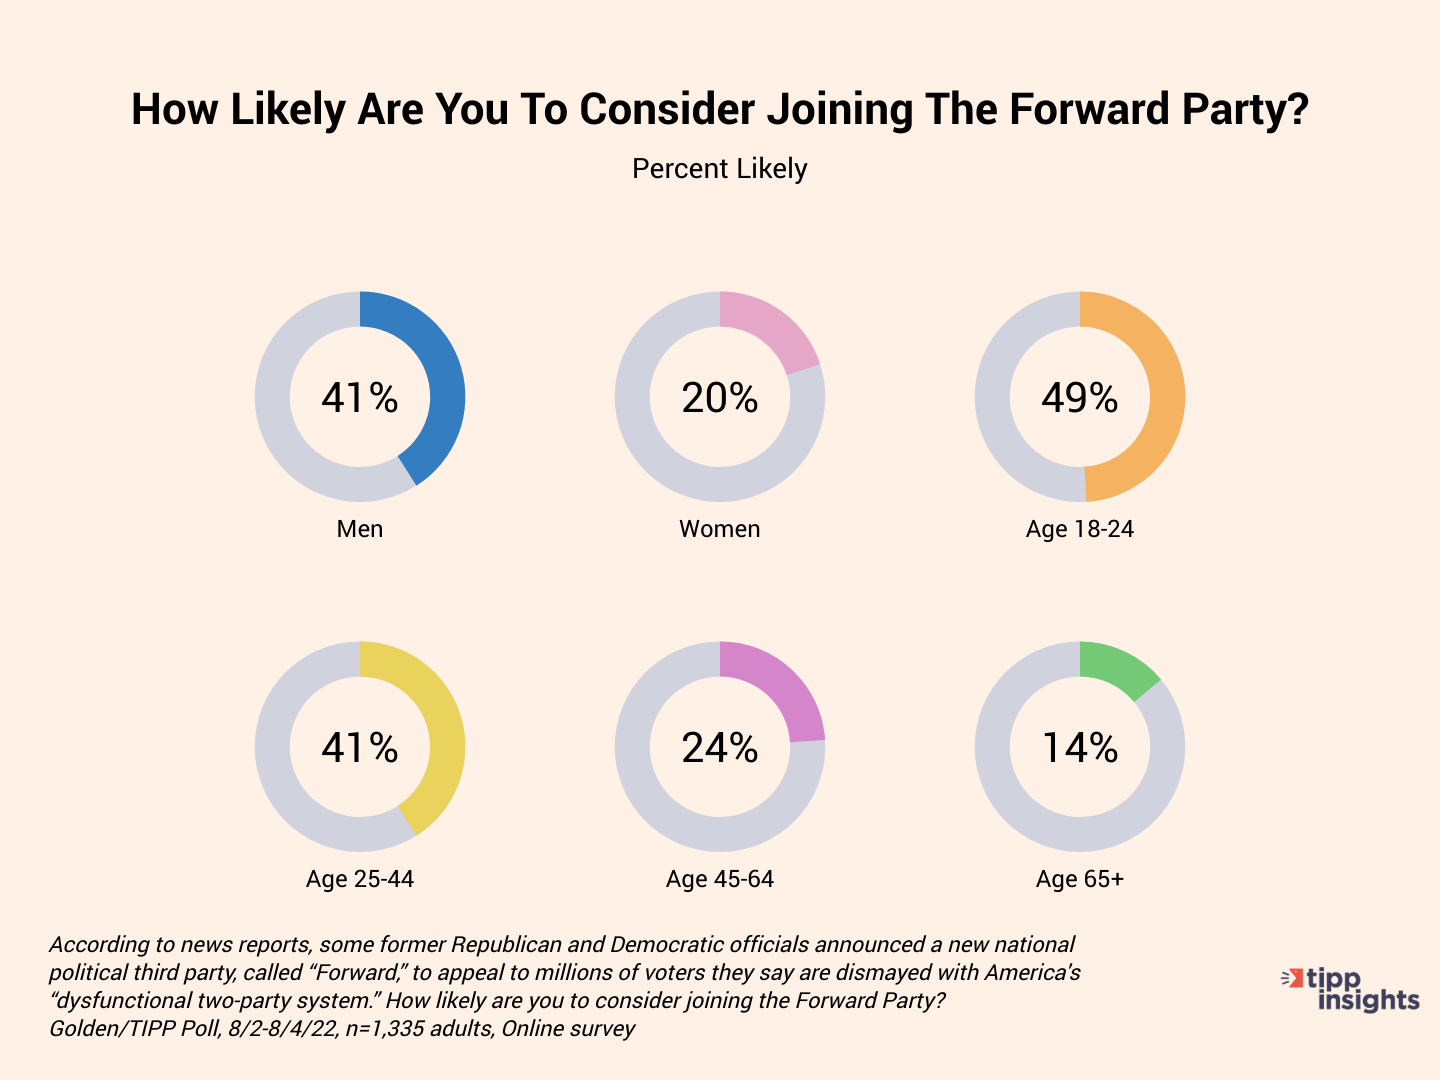 Golden/TIPP Poll Results: 8/2-8/4/22 How likely are Americans to consider joing the forward party demographics (chart)